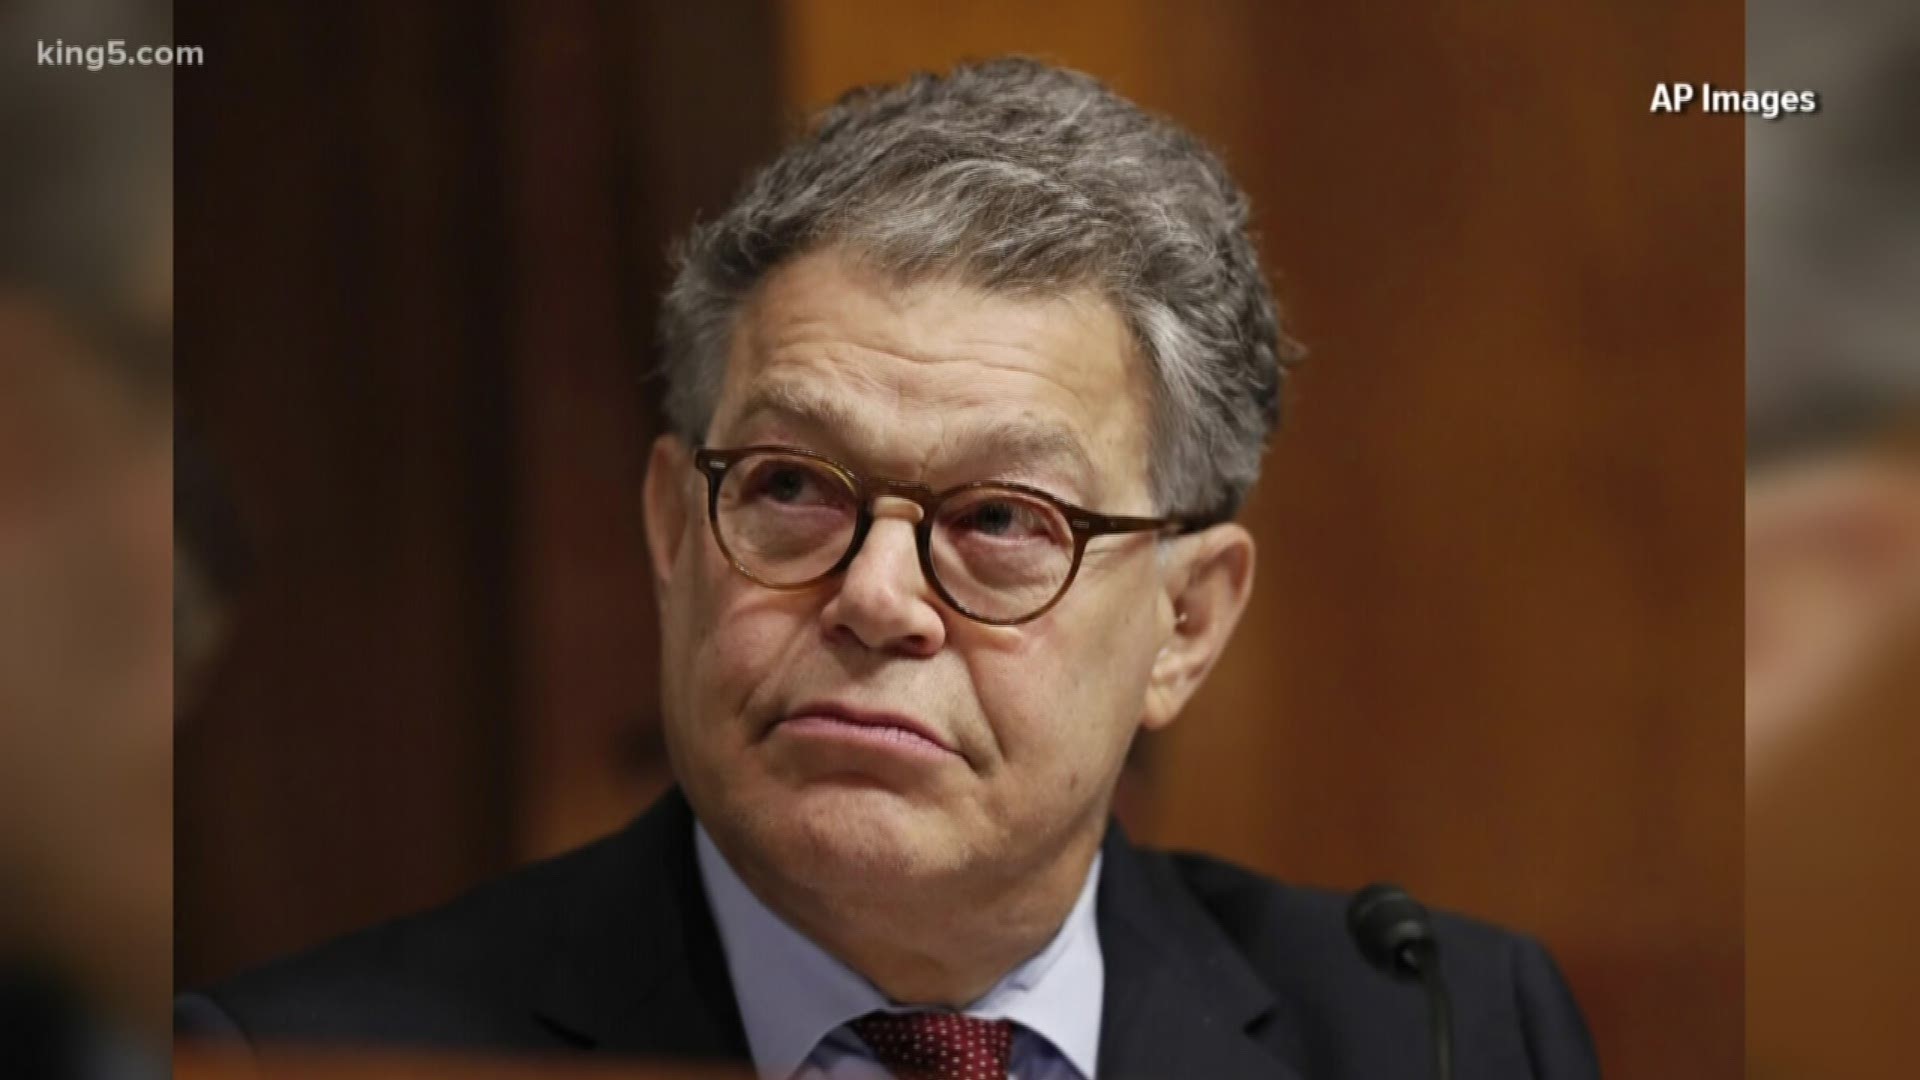 The allegation comes from a woman who says she was groped by Al Franken at an event in Seattle in 2006.